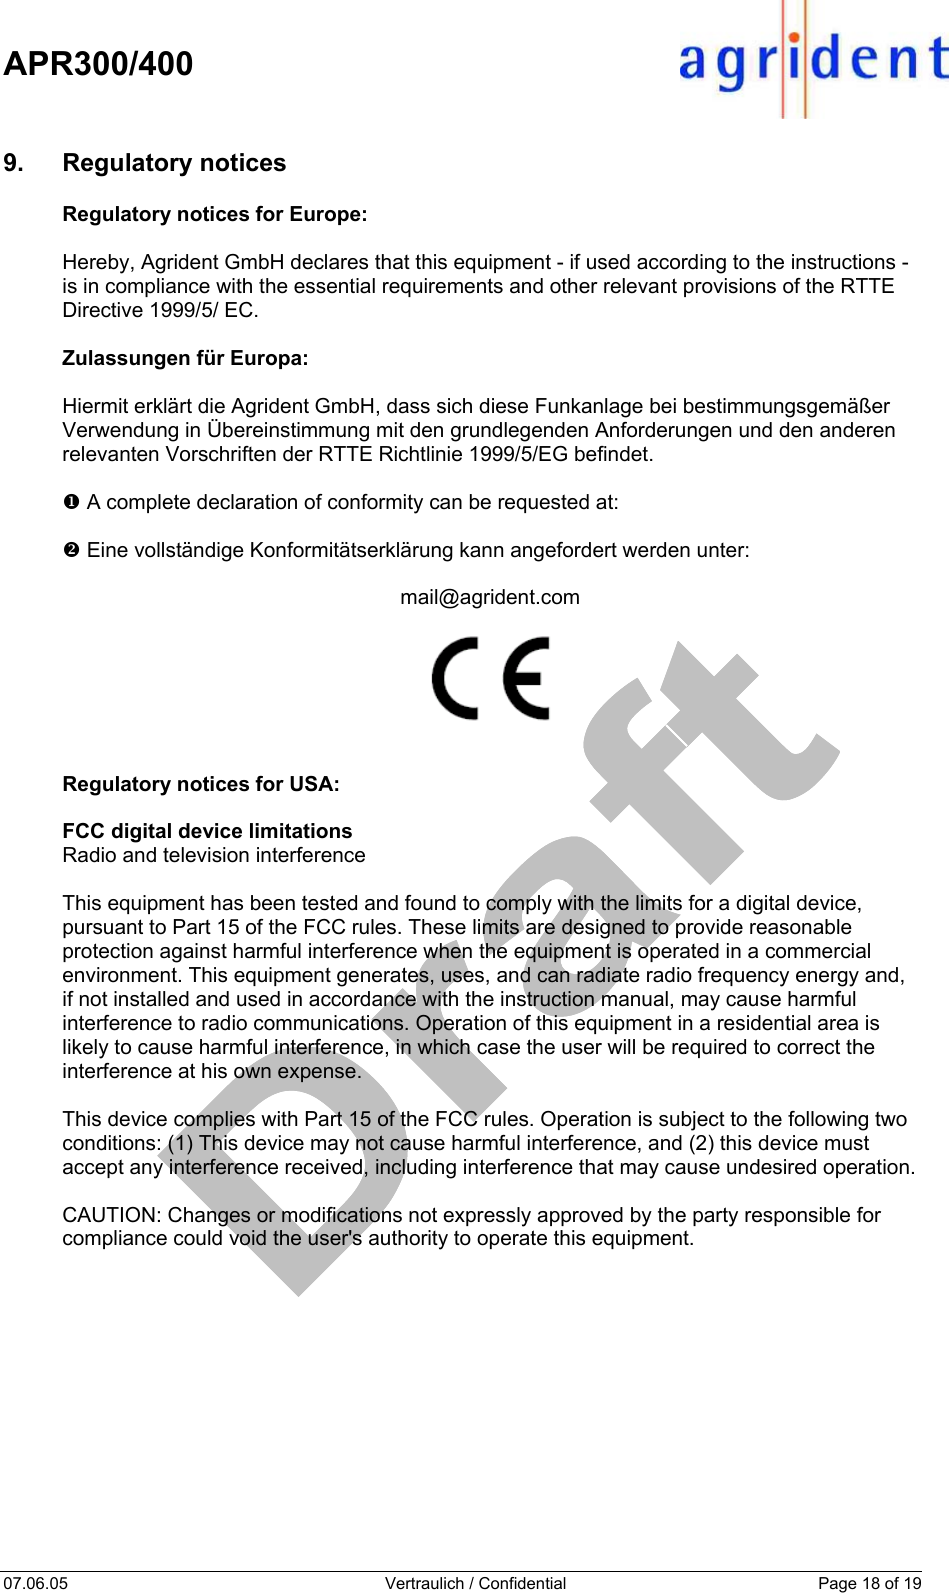    APR300/400  07.06.05  Vertraulich / Confidential  Page 18 of 19  9. Regulatory notices Regulatory notices for Europe:   Hereby, Agrident GmbH declares that this equipment - if used according to the instructions - is in compliance with the essential requirements and other relevant provisions of the RTTE Directive 1999/5/ EC.  Zulassungen für Europa:  Hiermit erklärt die Agrident GmbH, dass sich diese Funkanlage bei bestimmungsgemäßer Verwendung in Übereinstimmung mit den grundlegenden Anforderungen und den anderen relevanten Vorschriften der RTTE Richtlinie 1999/5/EG befindet.  X A complete declaration of conformity can be requested at:  Y Eine vollständige Konformitätserklärung kann angefordert werden unter:  mail@agrident.com     Regulatory notices for USA:  FCC digital device limitations Radio and television interference  This equipment has been tested and found to comply with the limits for a digital device, pursuant to Part 15 of the FCC rules. These limits are designed to provide reasonable protection against harmful interference when the equipment is operated in a commercial environment. This equipment generates, uses, and can radiate radio frequency energy and, if not installed and used in accordance with the instruction manual, may cause harmful interference to radio communications. Operation of this equipment in a residential area is likely to cause harmful interference, in which case the user will be required to correct the interference at his own expense.  This device complies with Part 15 of the FCC rules. Operation is subject to the following two conditions: (1) This device may not cause harmful interference, and (2) this device must accept any interference received, including interference that may cause undesired operation.  CAUTION: Changes or modifications not expressly approved by the party responsible for compliance could void the user&apos;s authority to operate this equipment. 